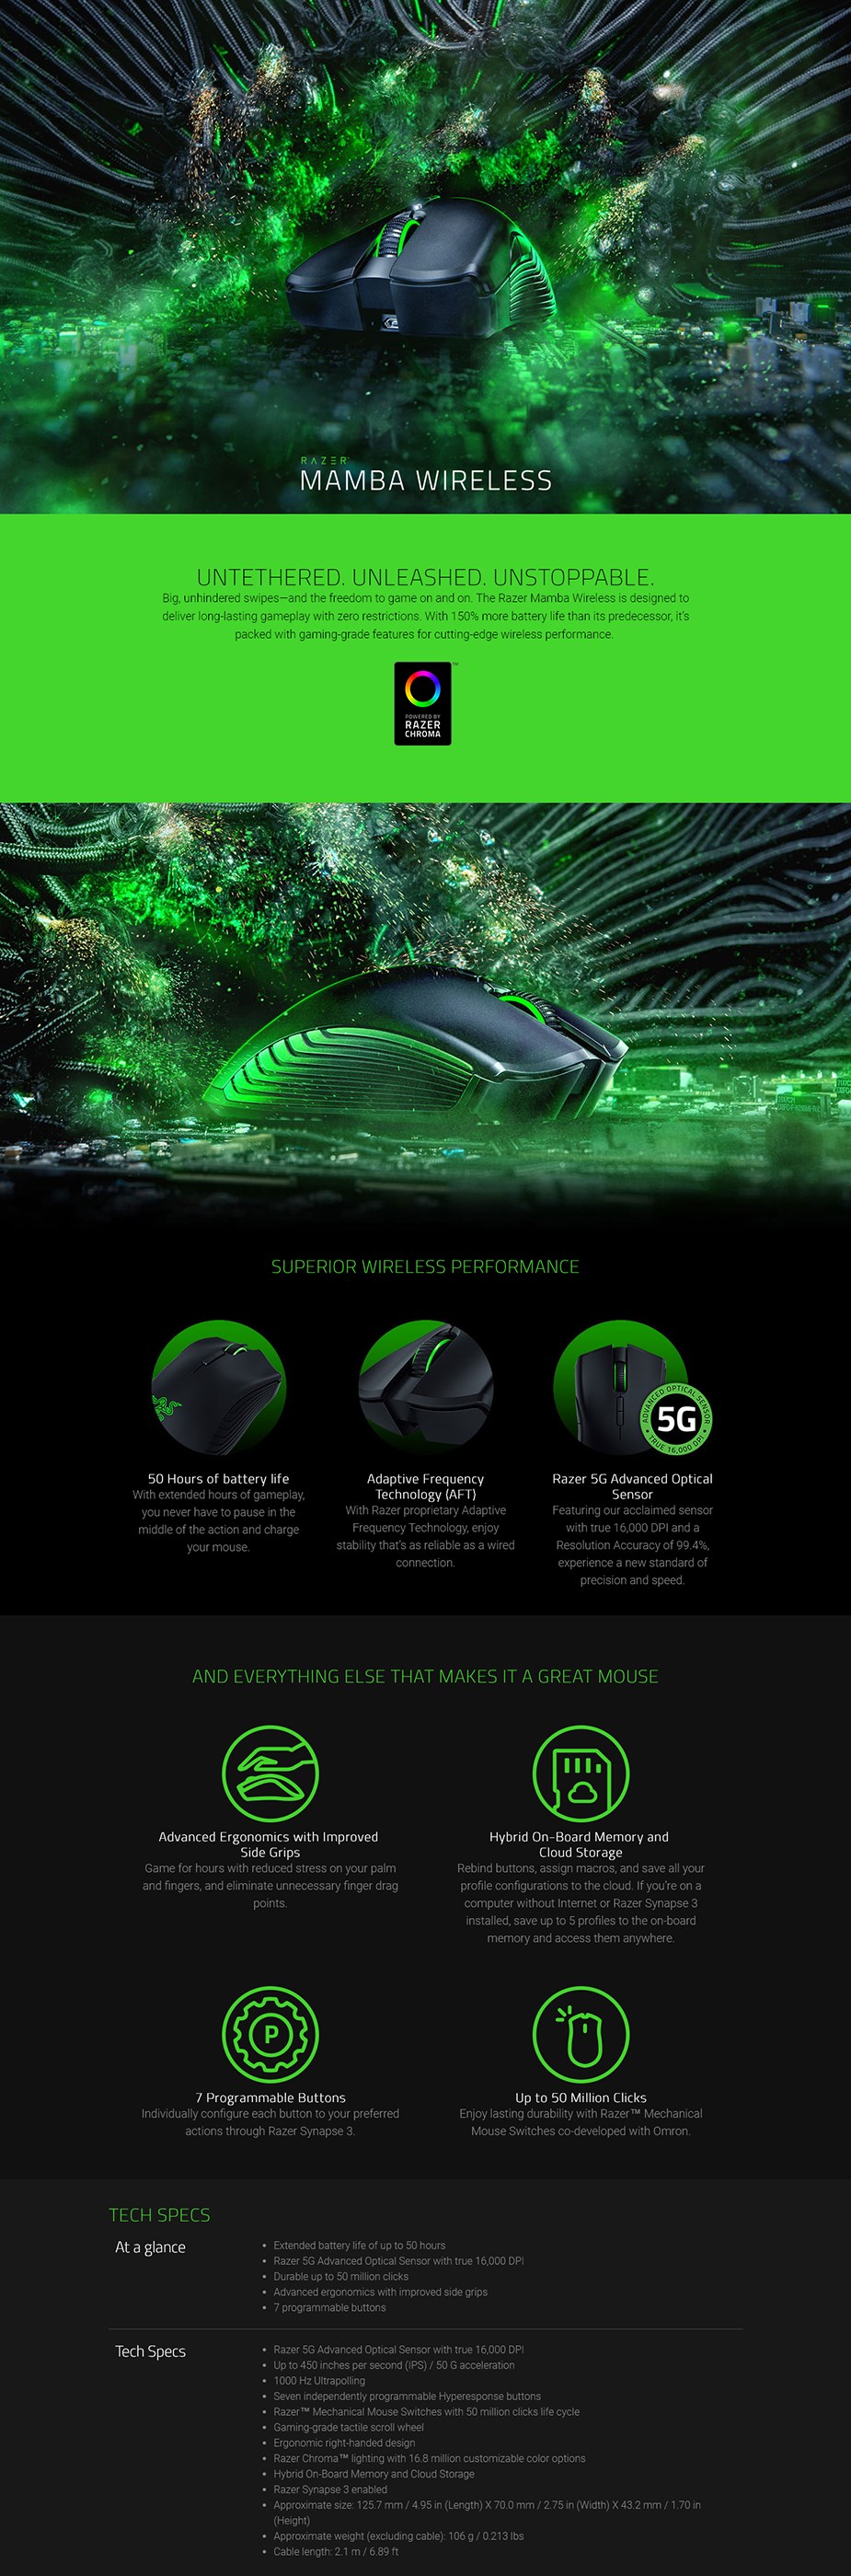 Razer Mamba Wireless Gaming Mouse - Display Overview 1